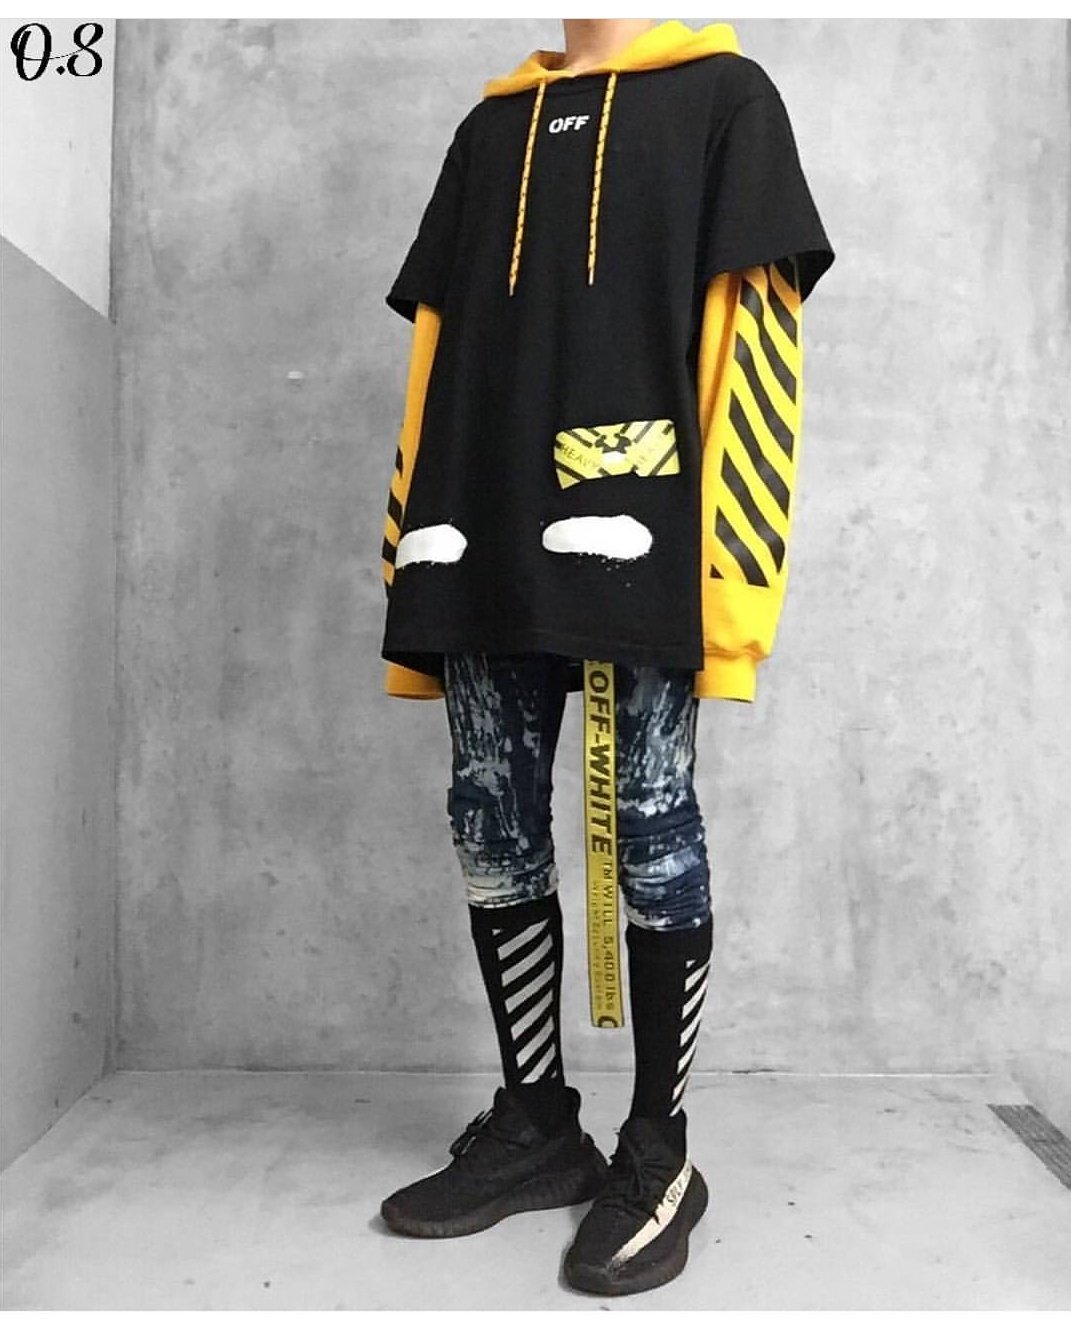 off white yeezy outfit